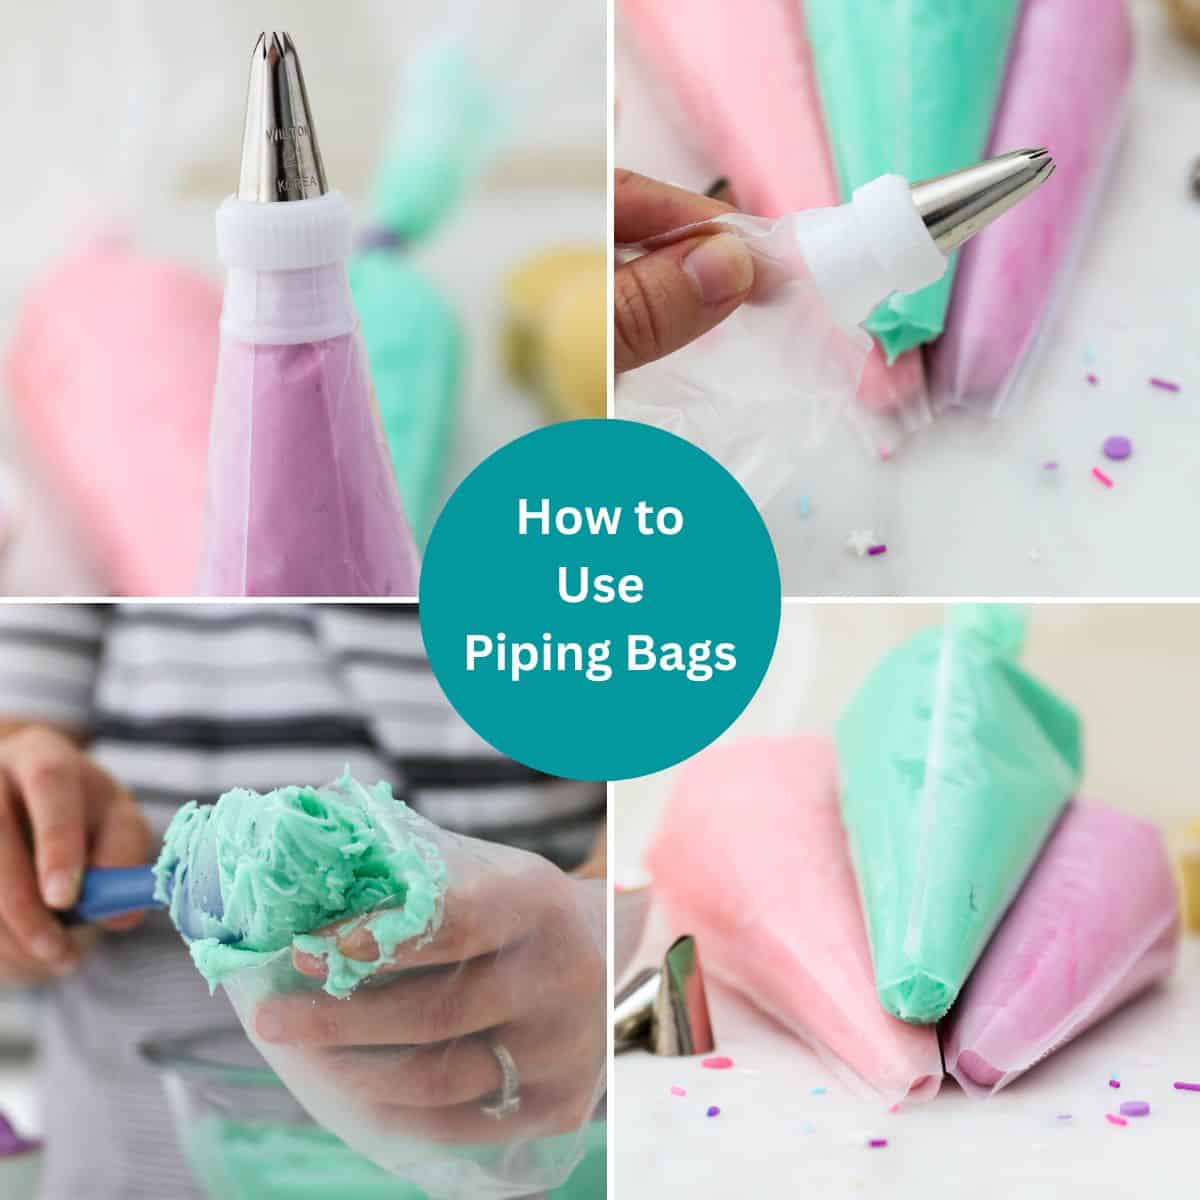 What Are the Best Piping Bags and Tips?